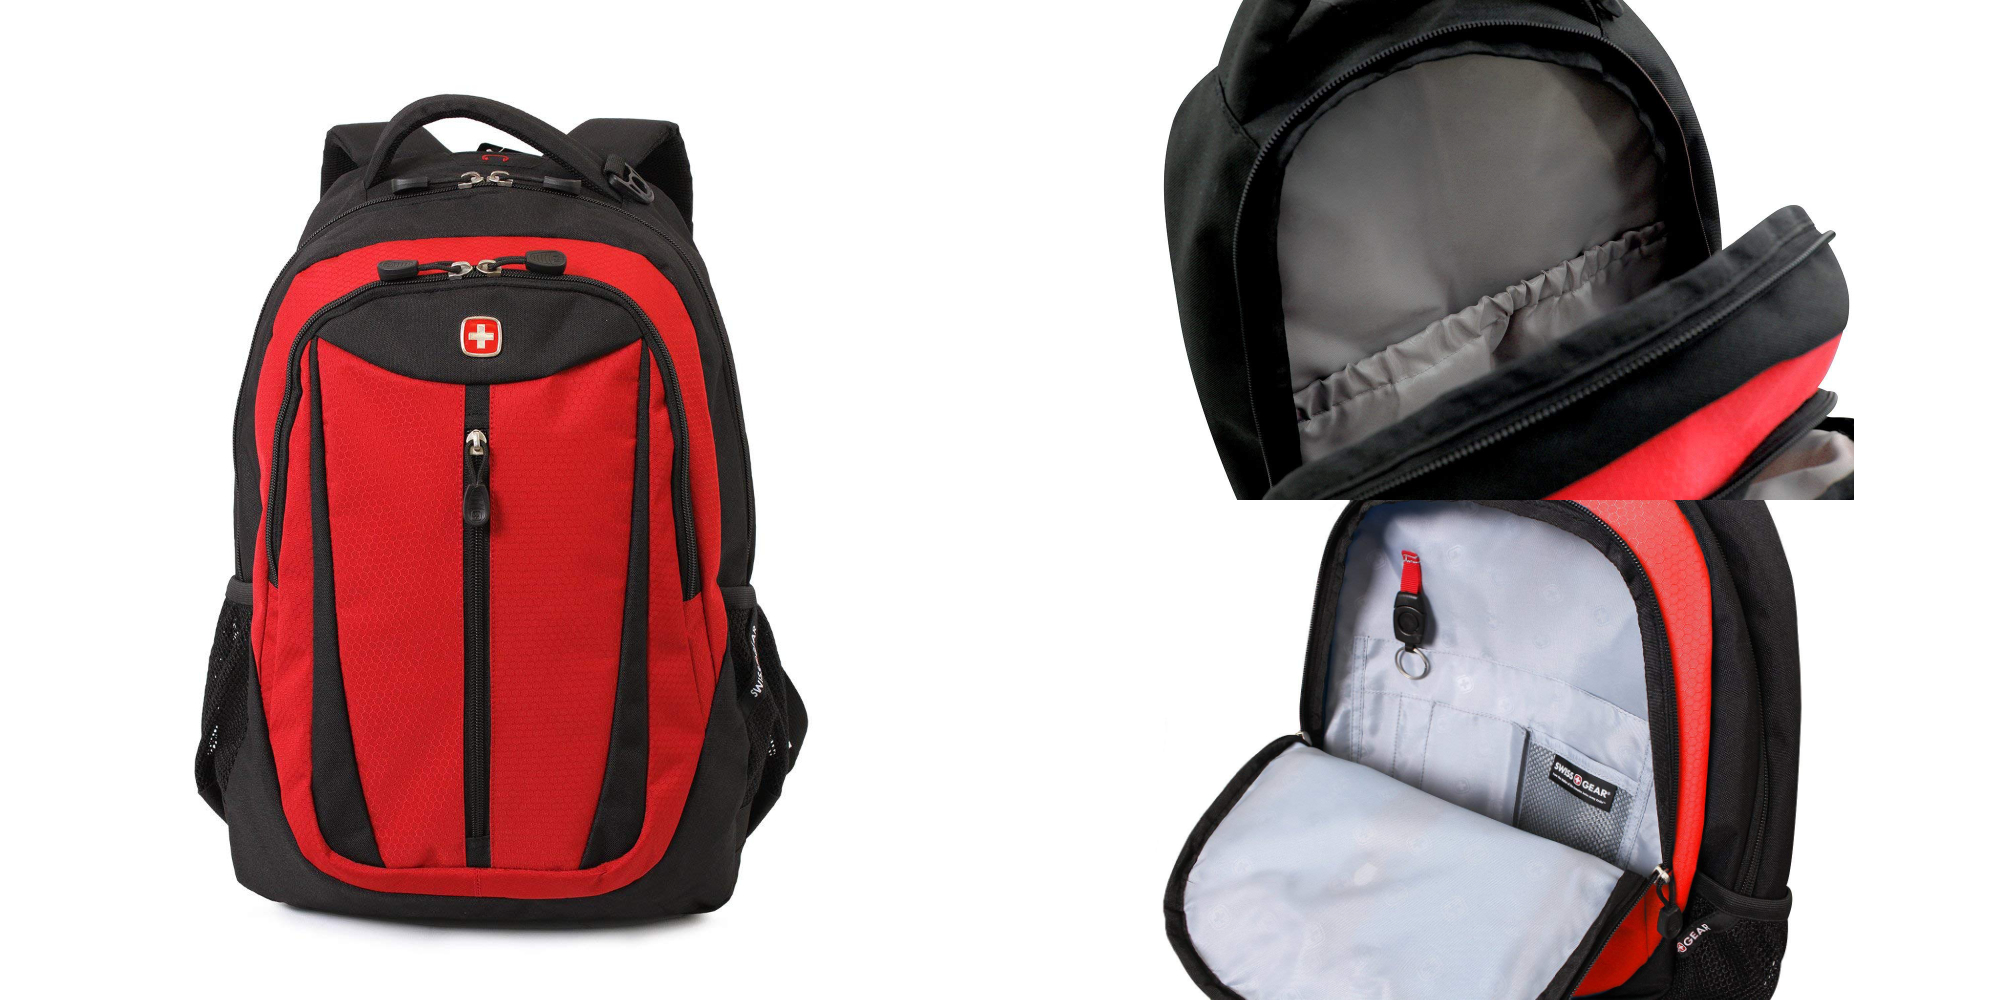 This Swiss Gear Backpack has a compartment for your 15-inch